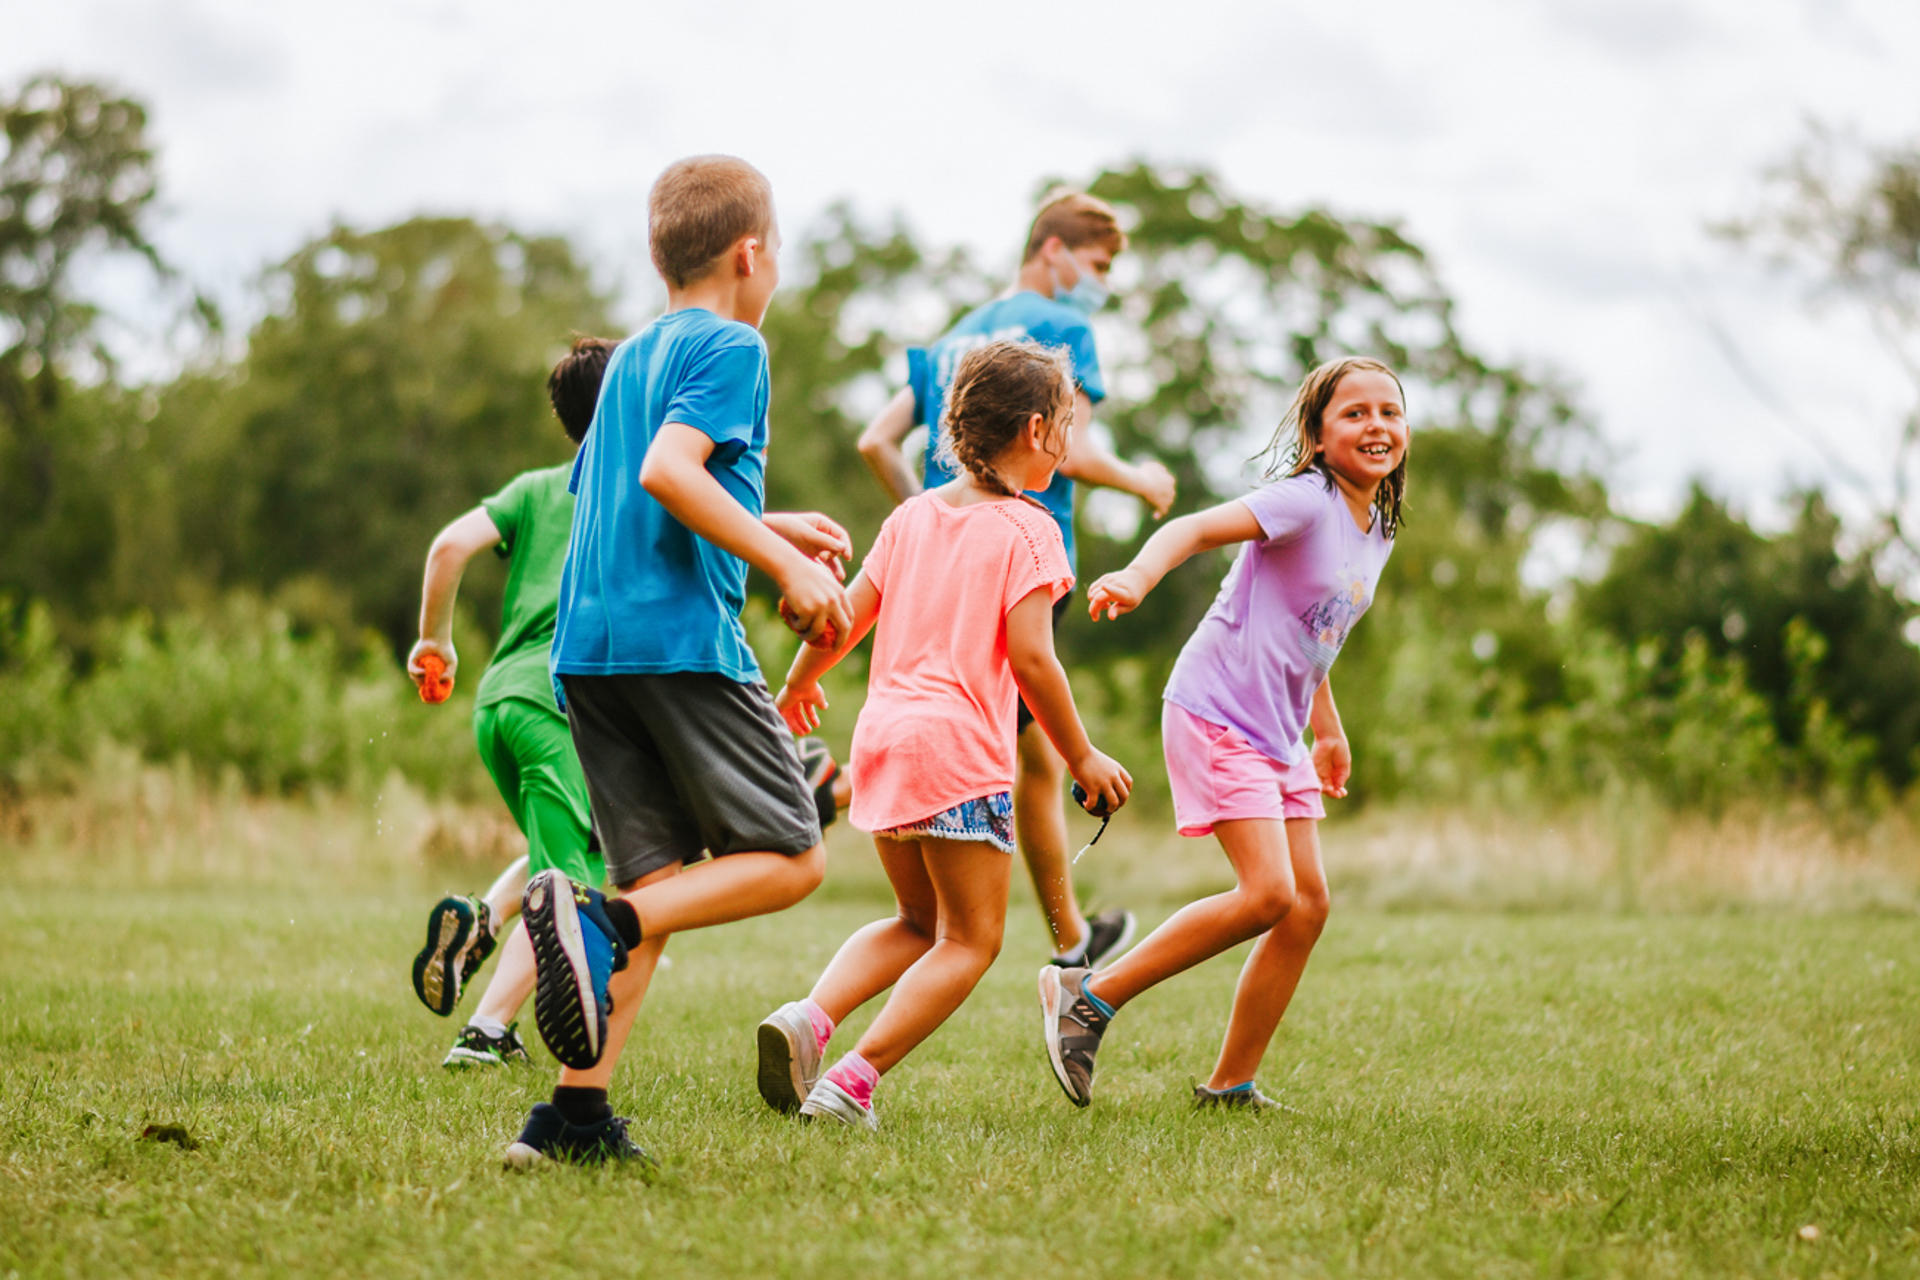 A group of campers at Stony Brook playing field games, running and smiling